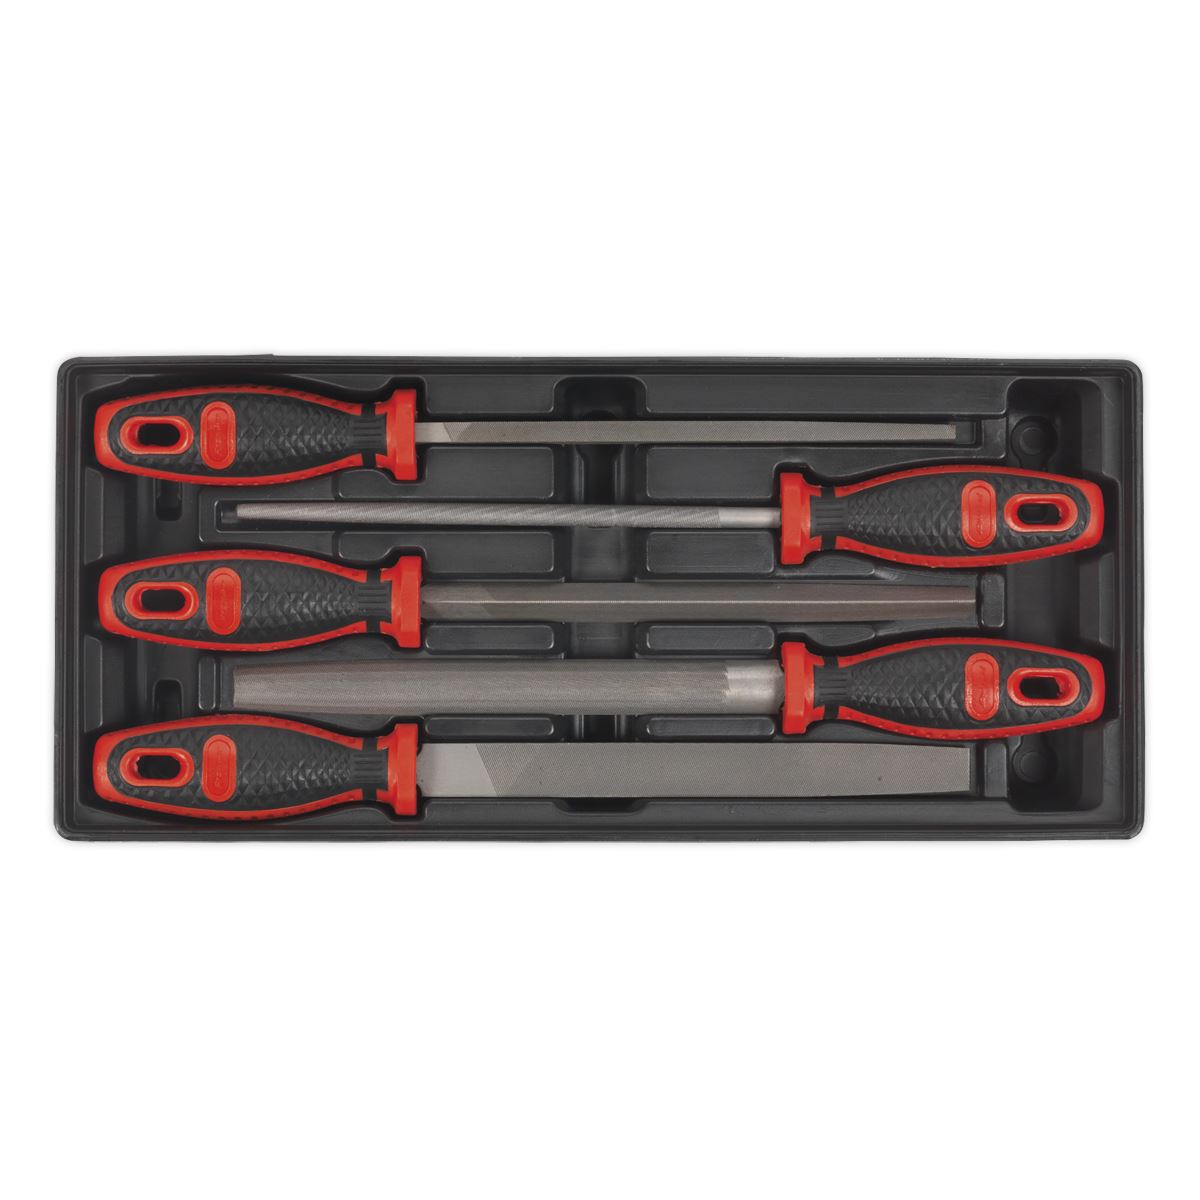 Sealey Premier Tool Tray with Engineer’s File Set 5pc